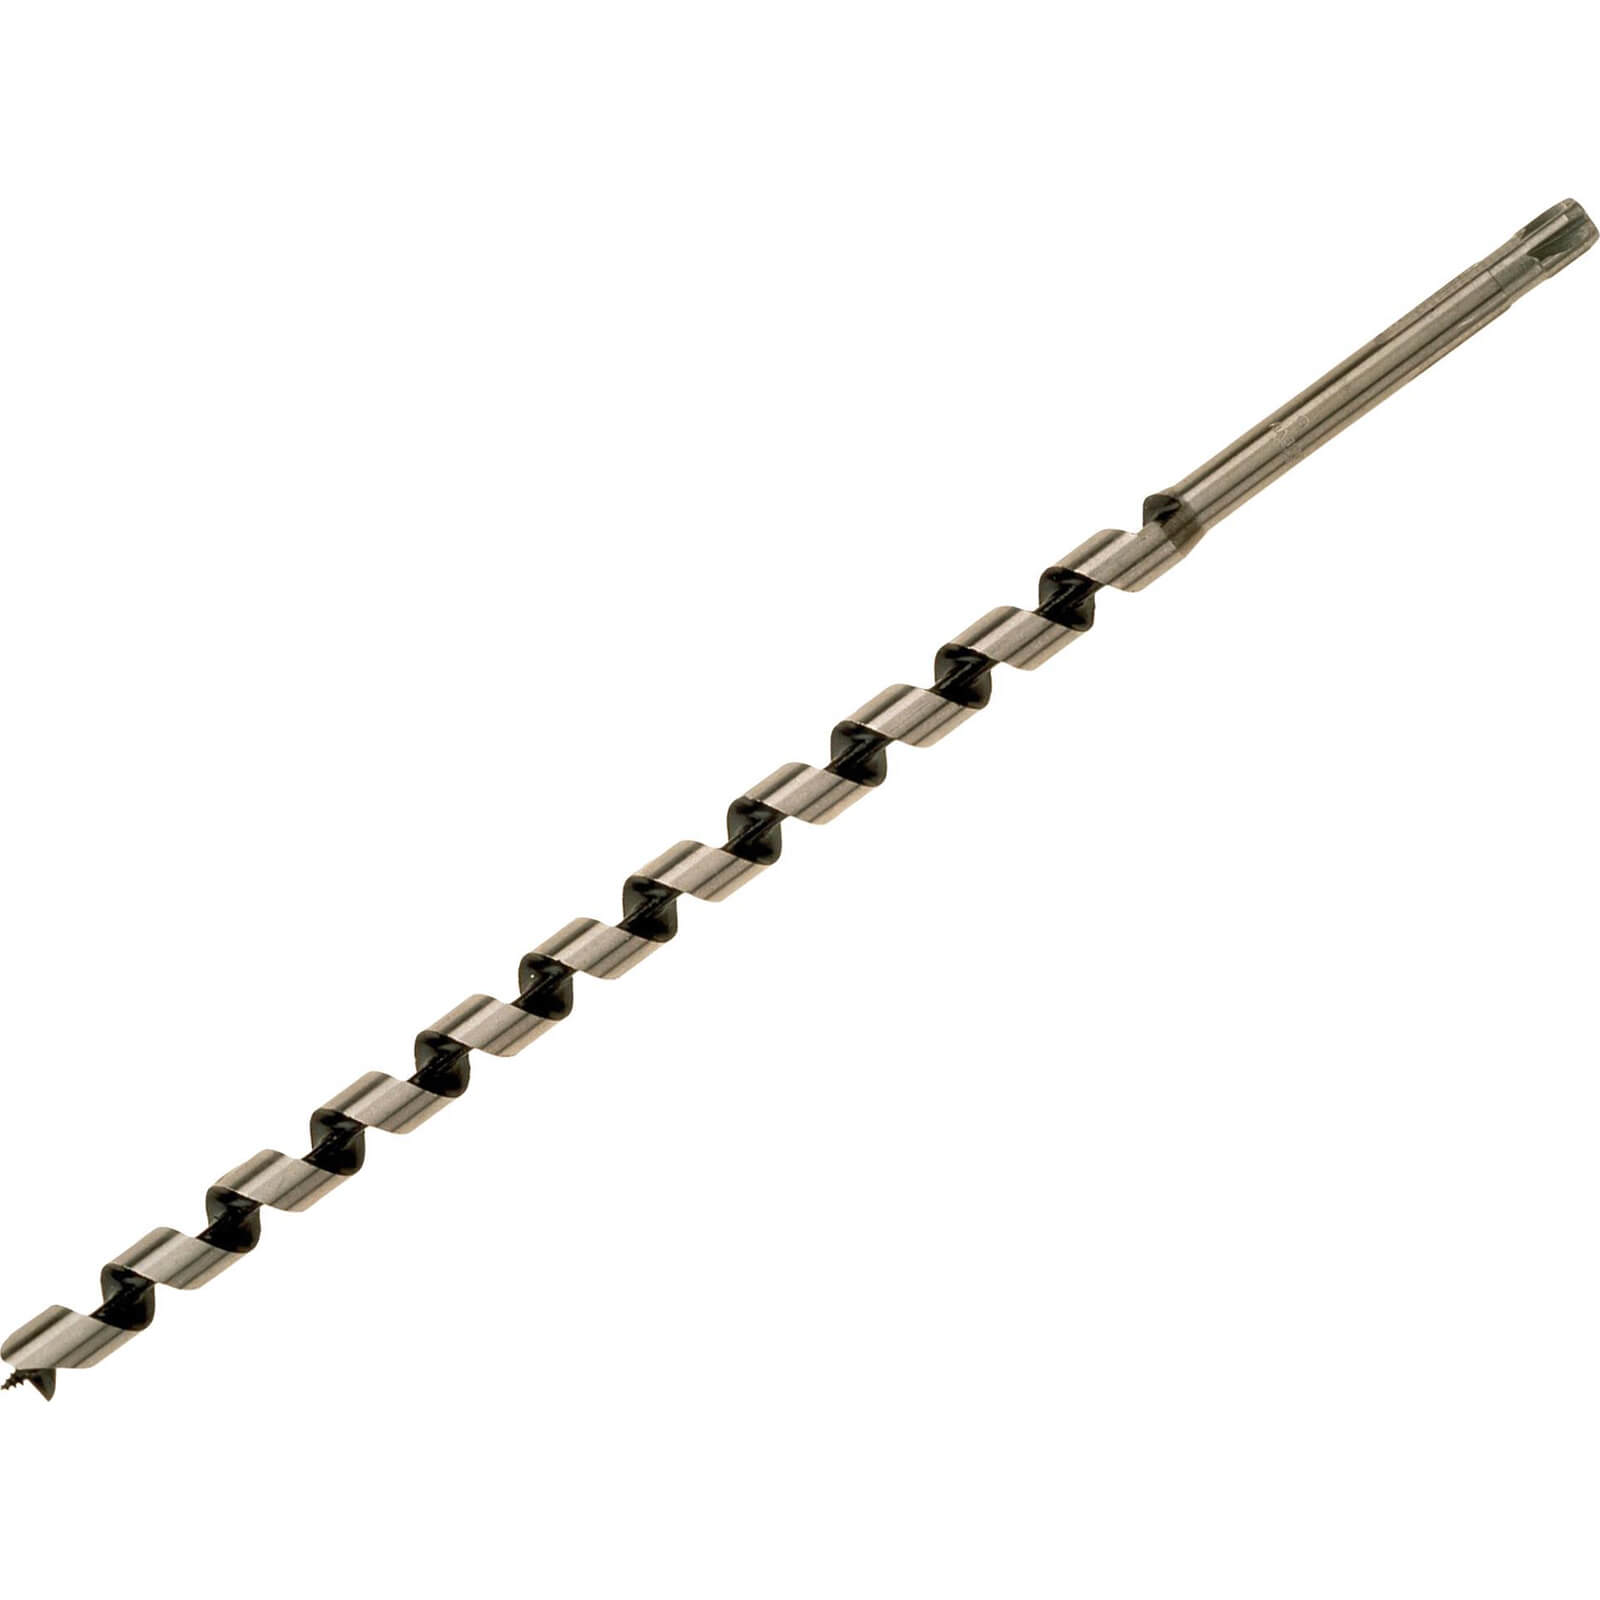 Image of Bahco 9627 Series Long Combination Auger Drill Bit 30mm 460mm